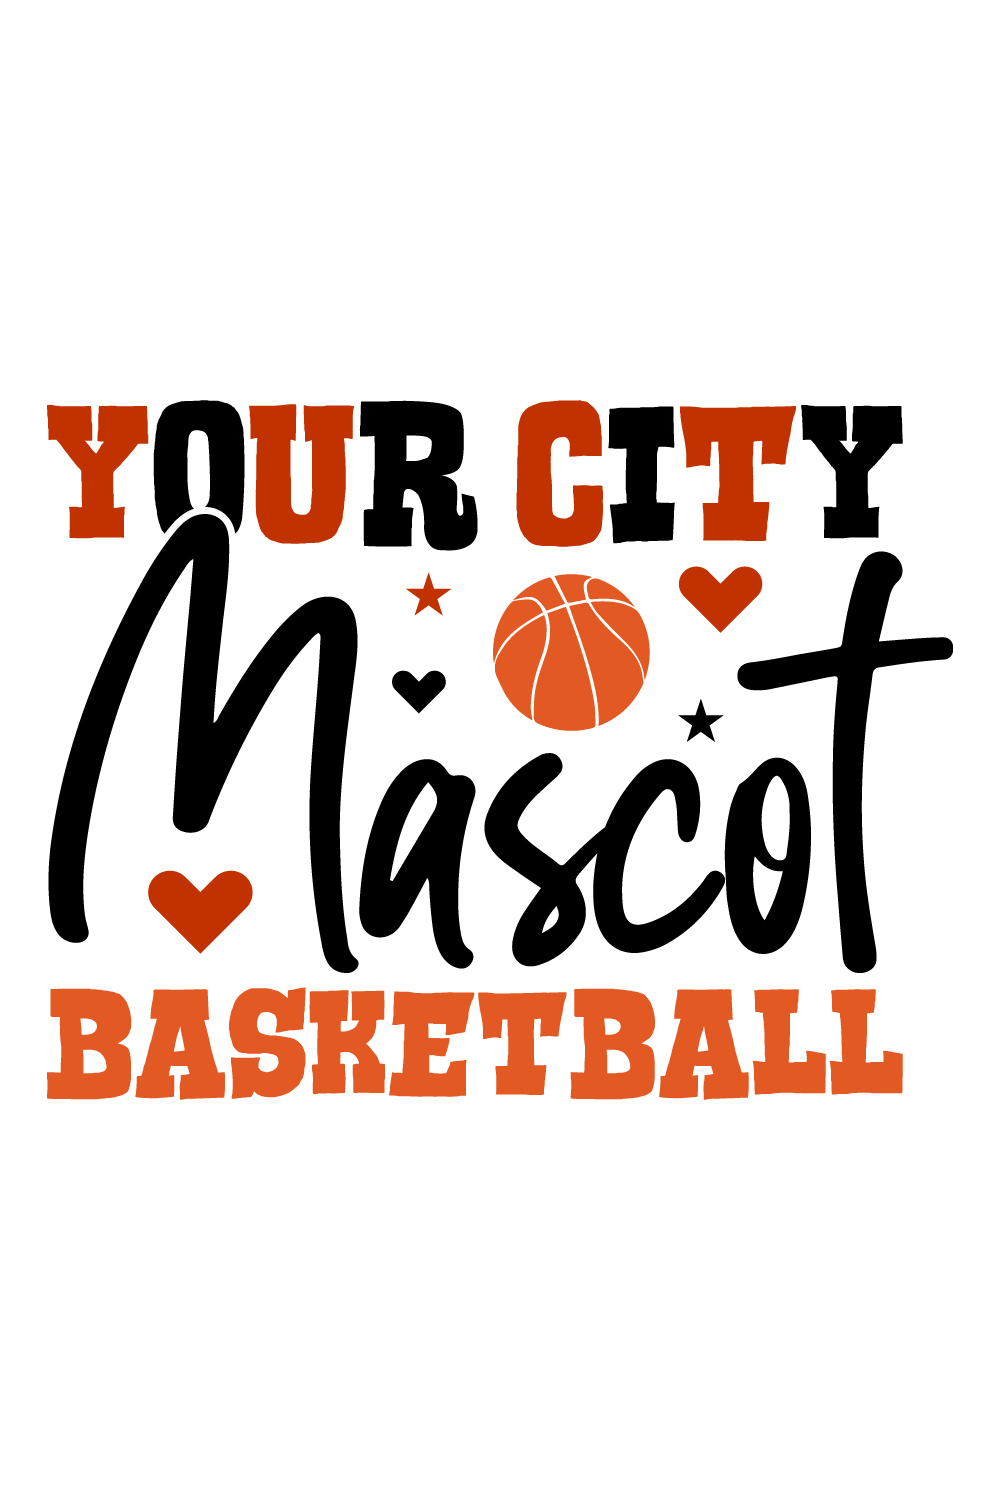 Your City Mascot Basketball pinterest preview image.